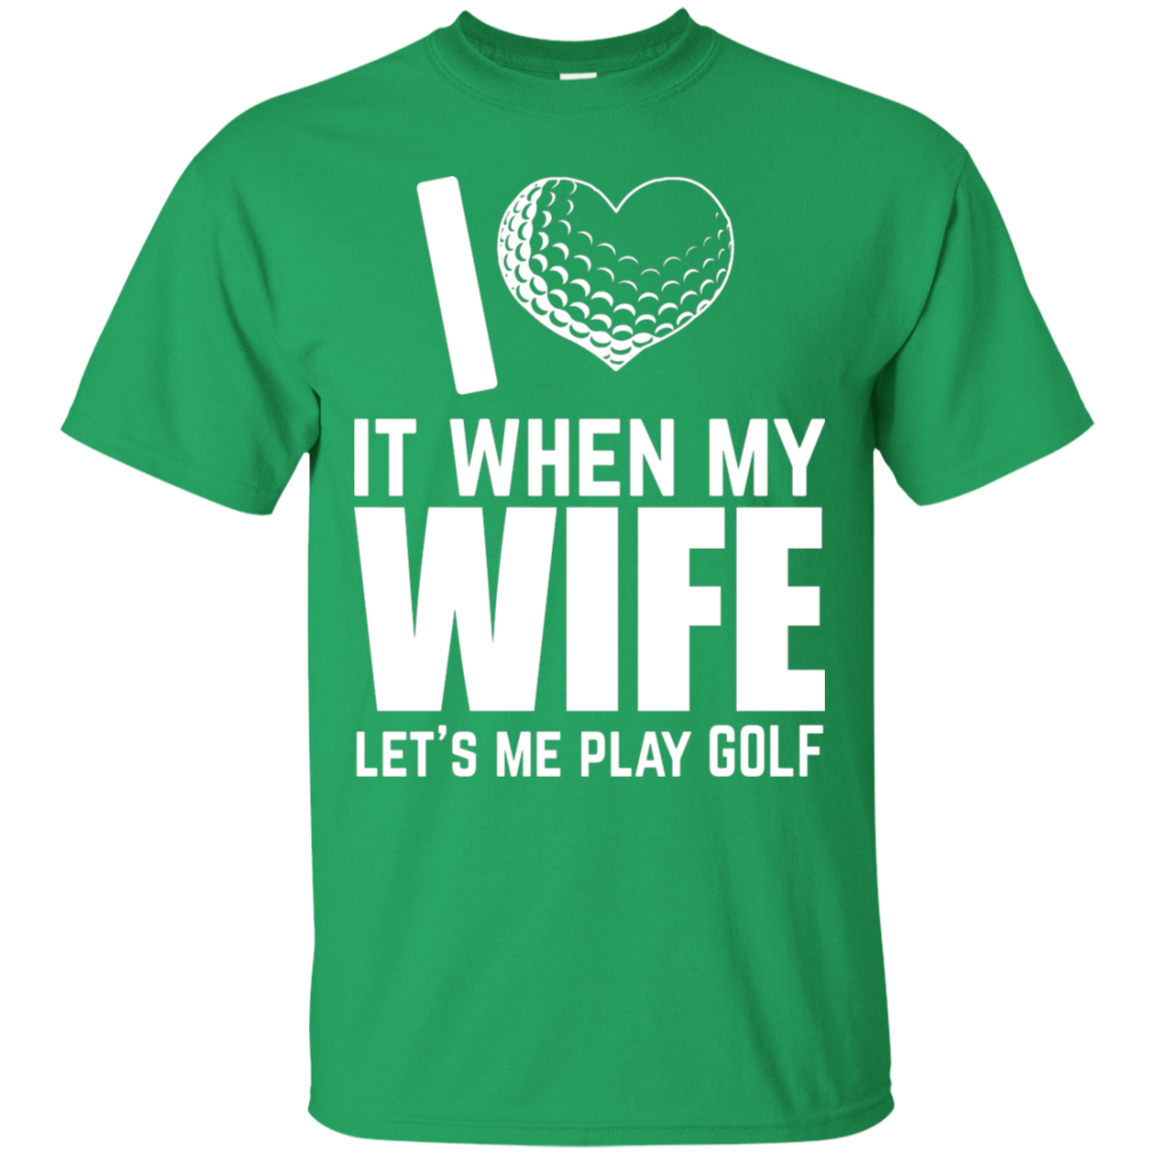 I Love It When My Wife Lets Me Play Golf T-Shirt Apparel - The Beer Lodge